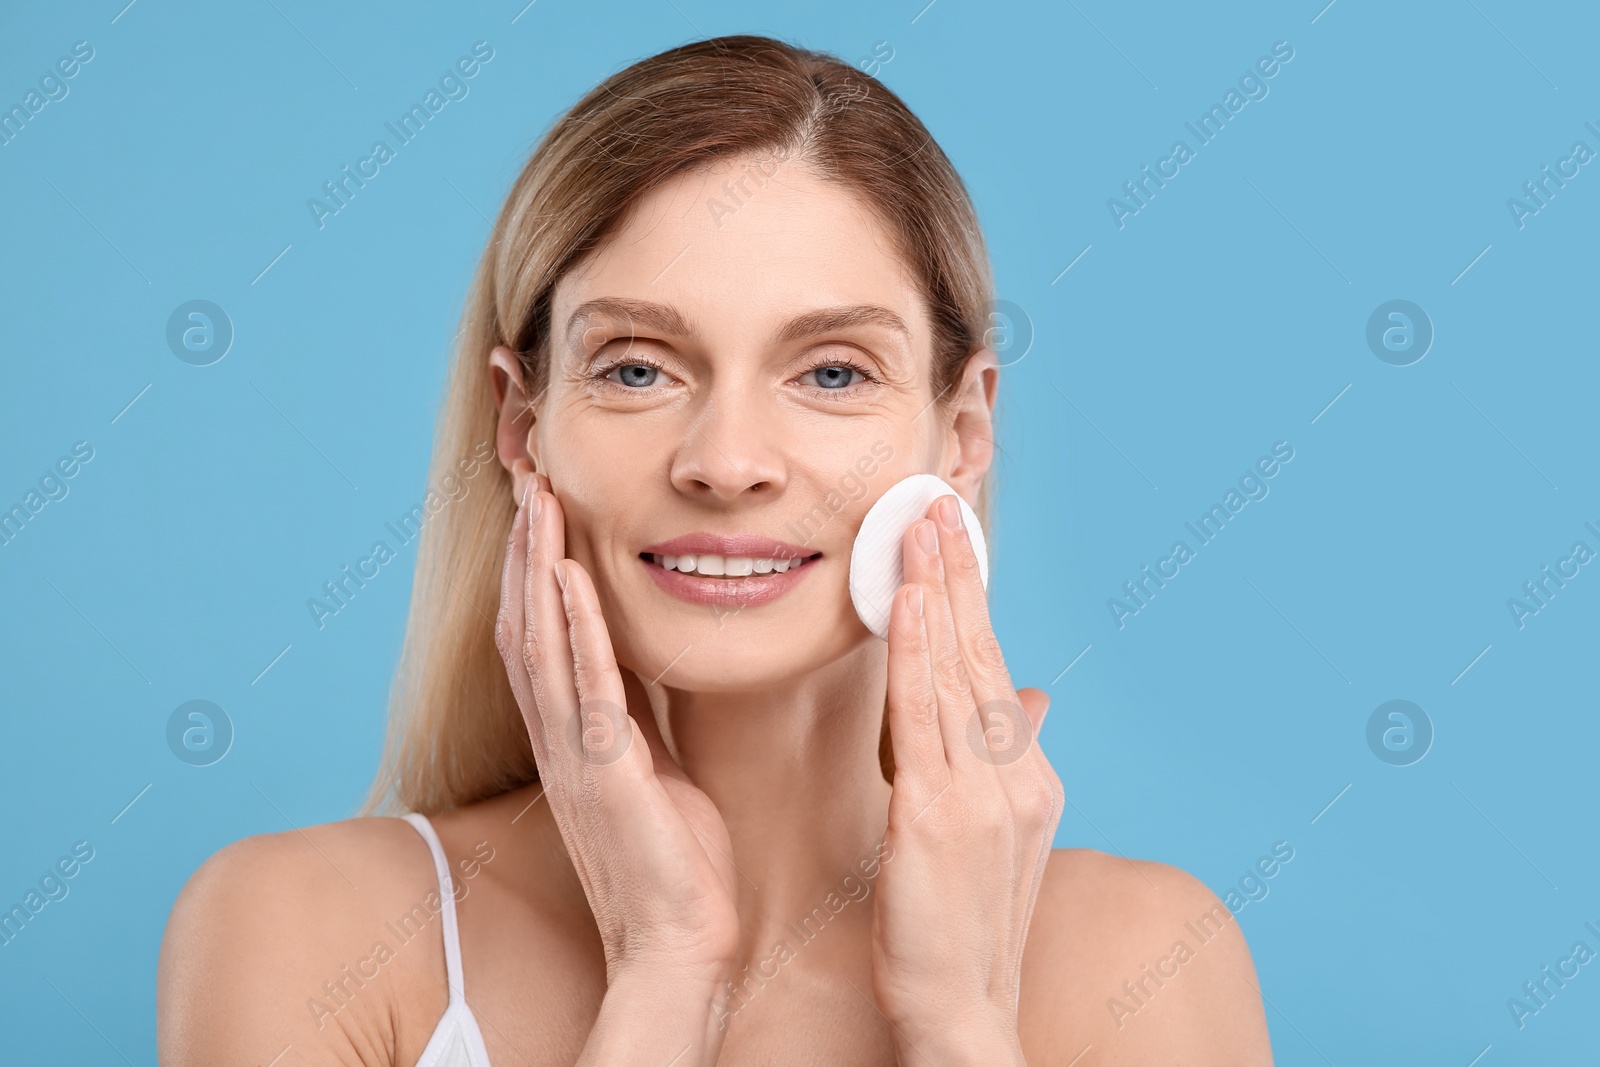 Photo of Beautiful woman removing makeup with cotton pad on light blue background